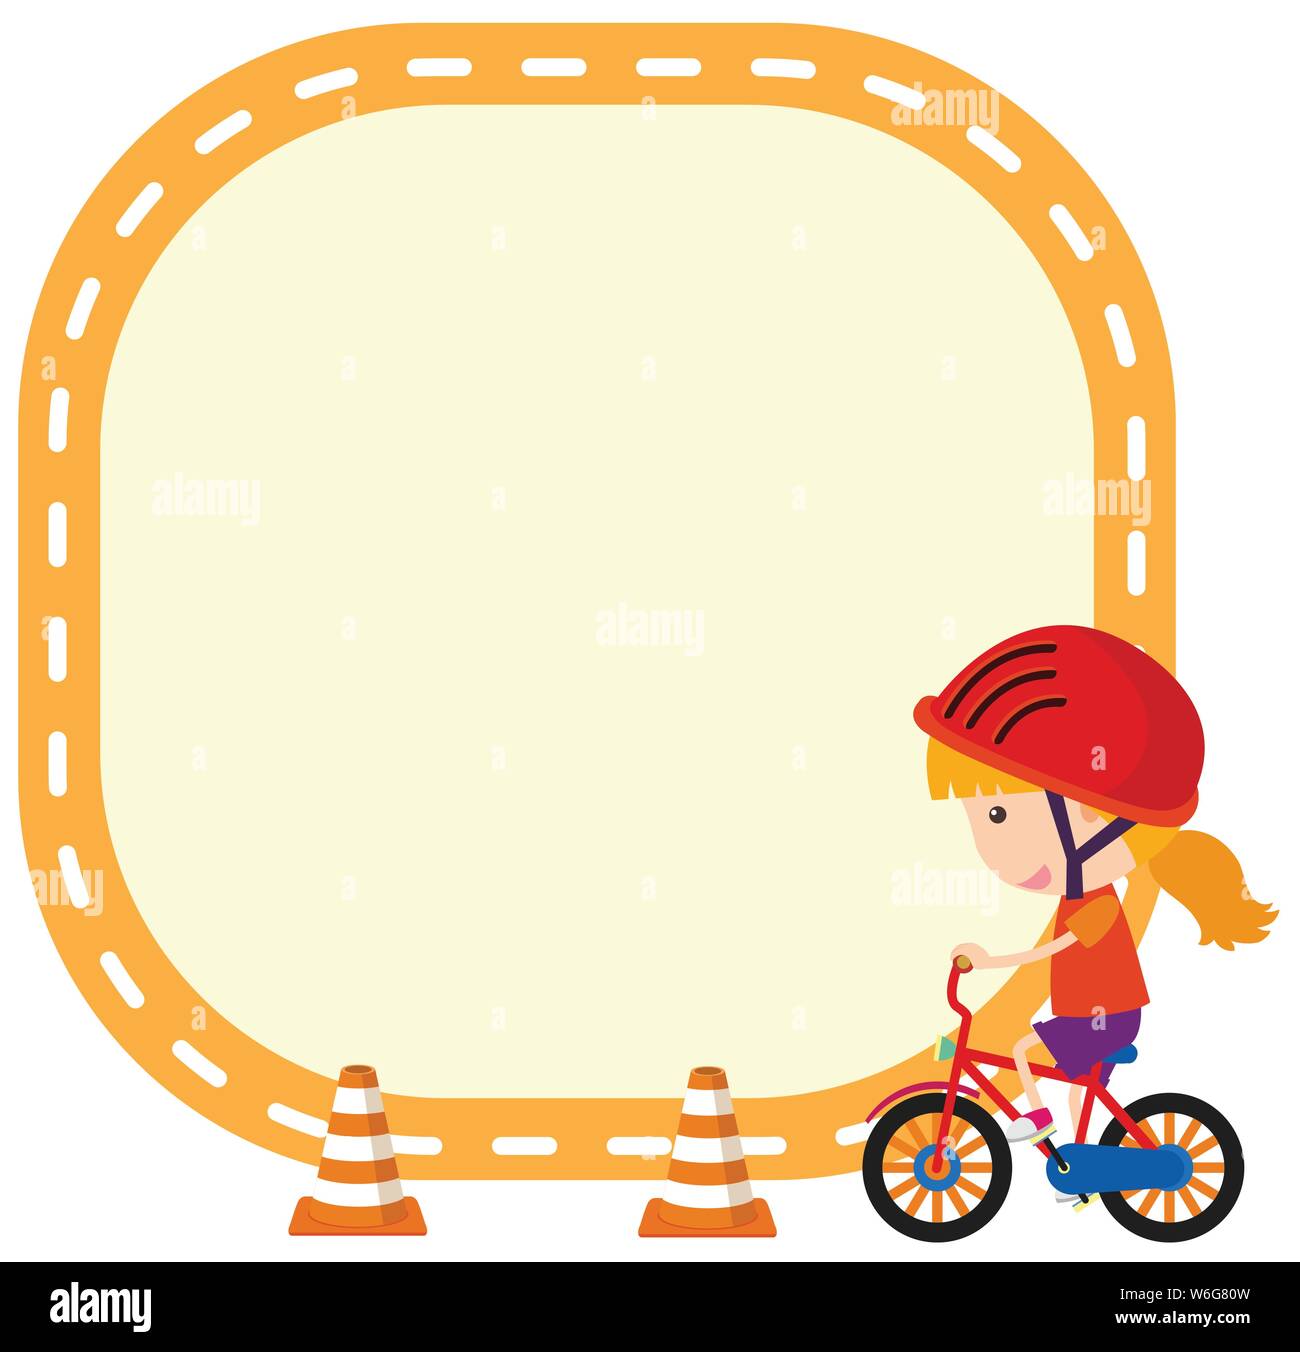 Frame design template with girl riding bicycle illustration Stock Vector